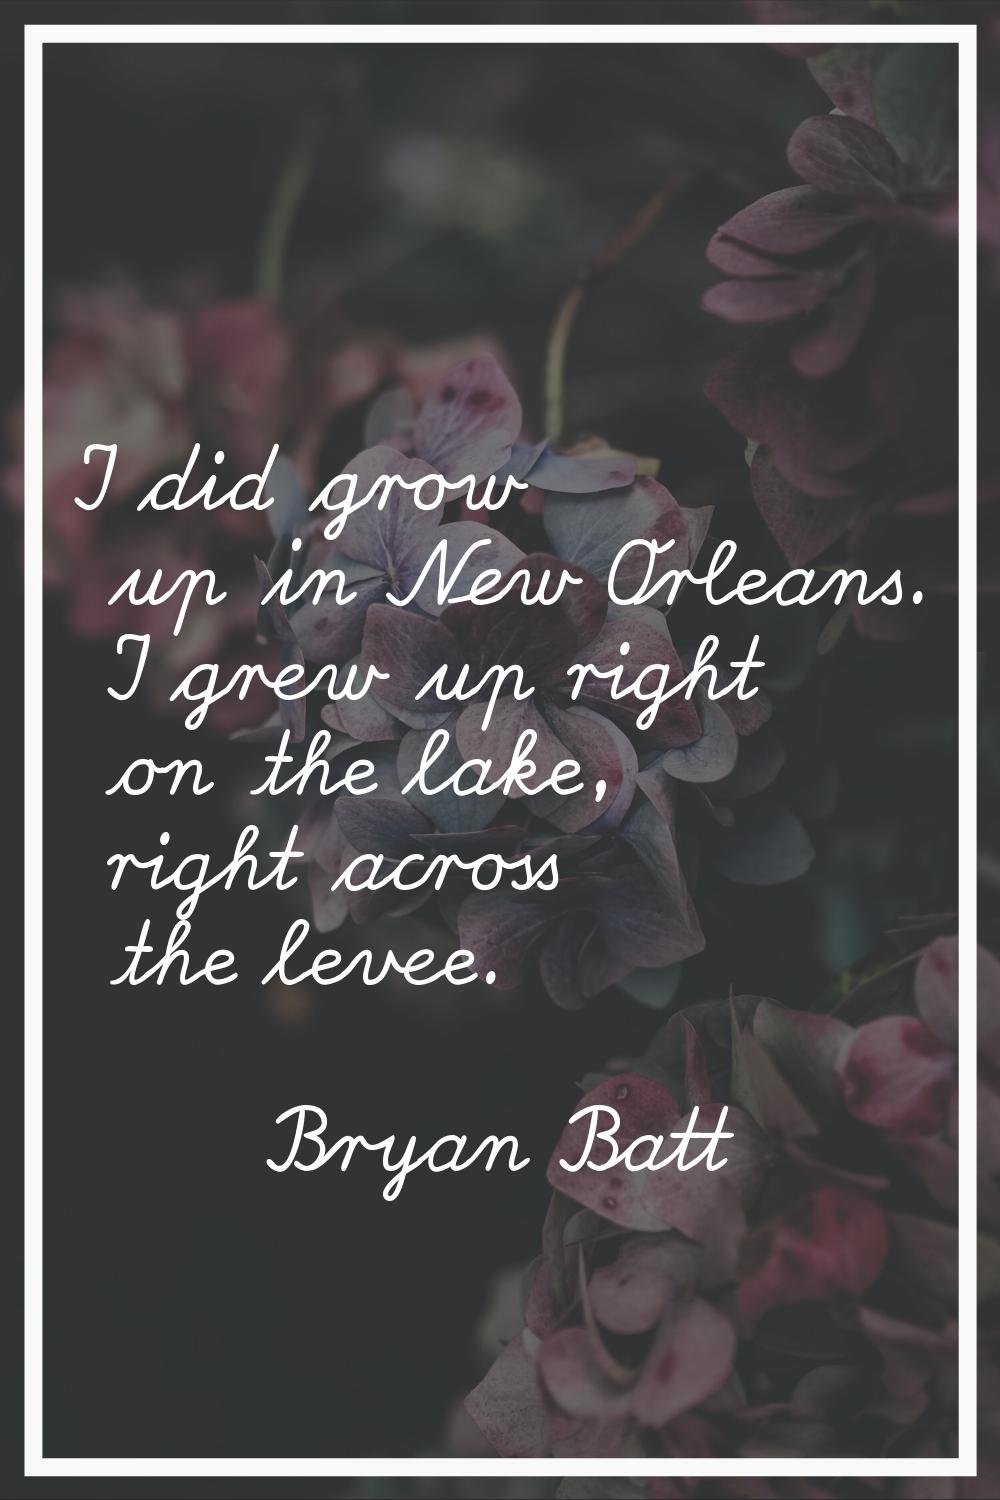 I did grow up in New Orleans. I grew up right on the lake, right across the levee.